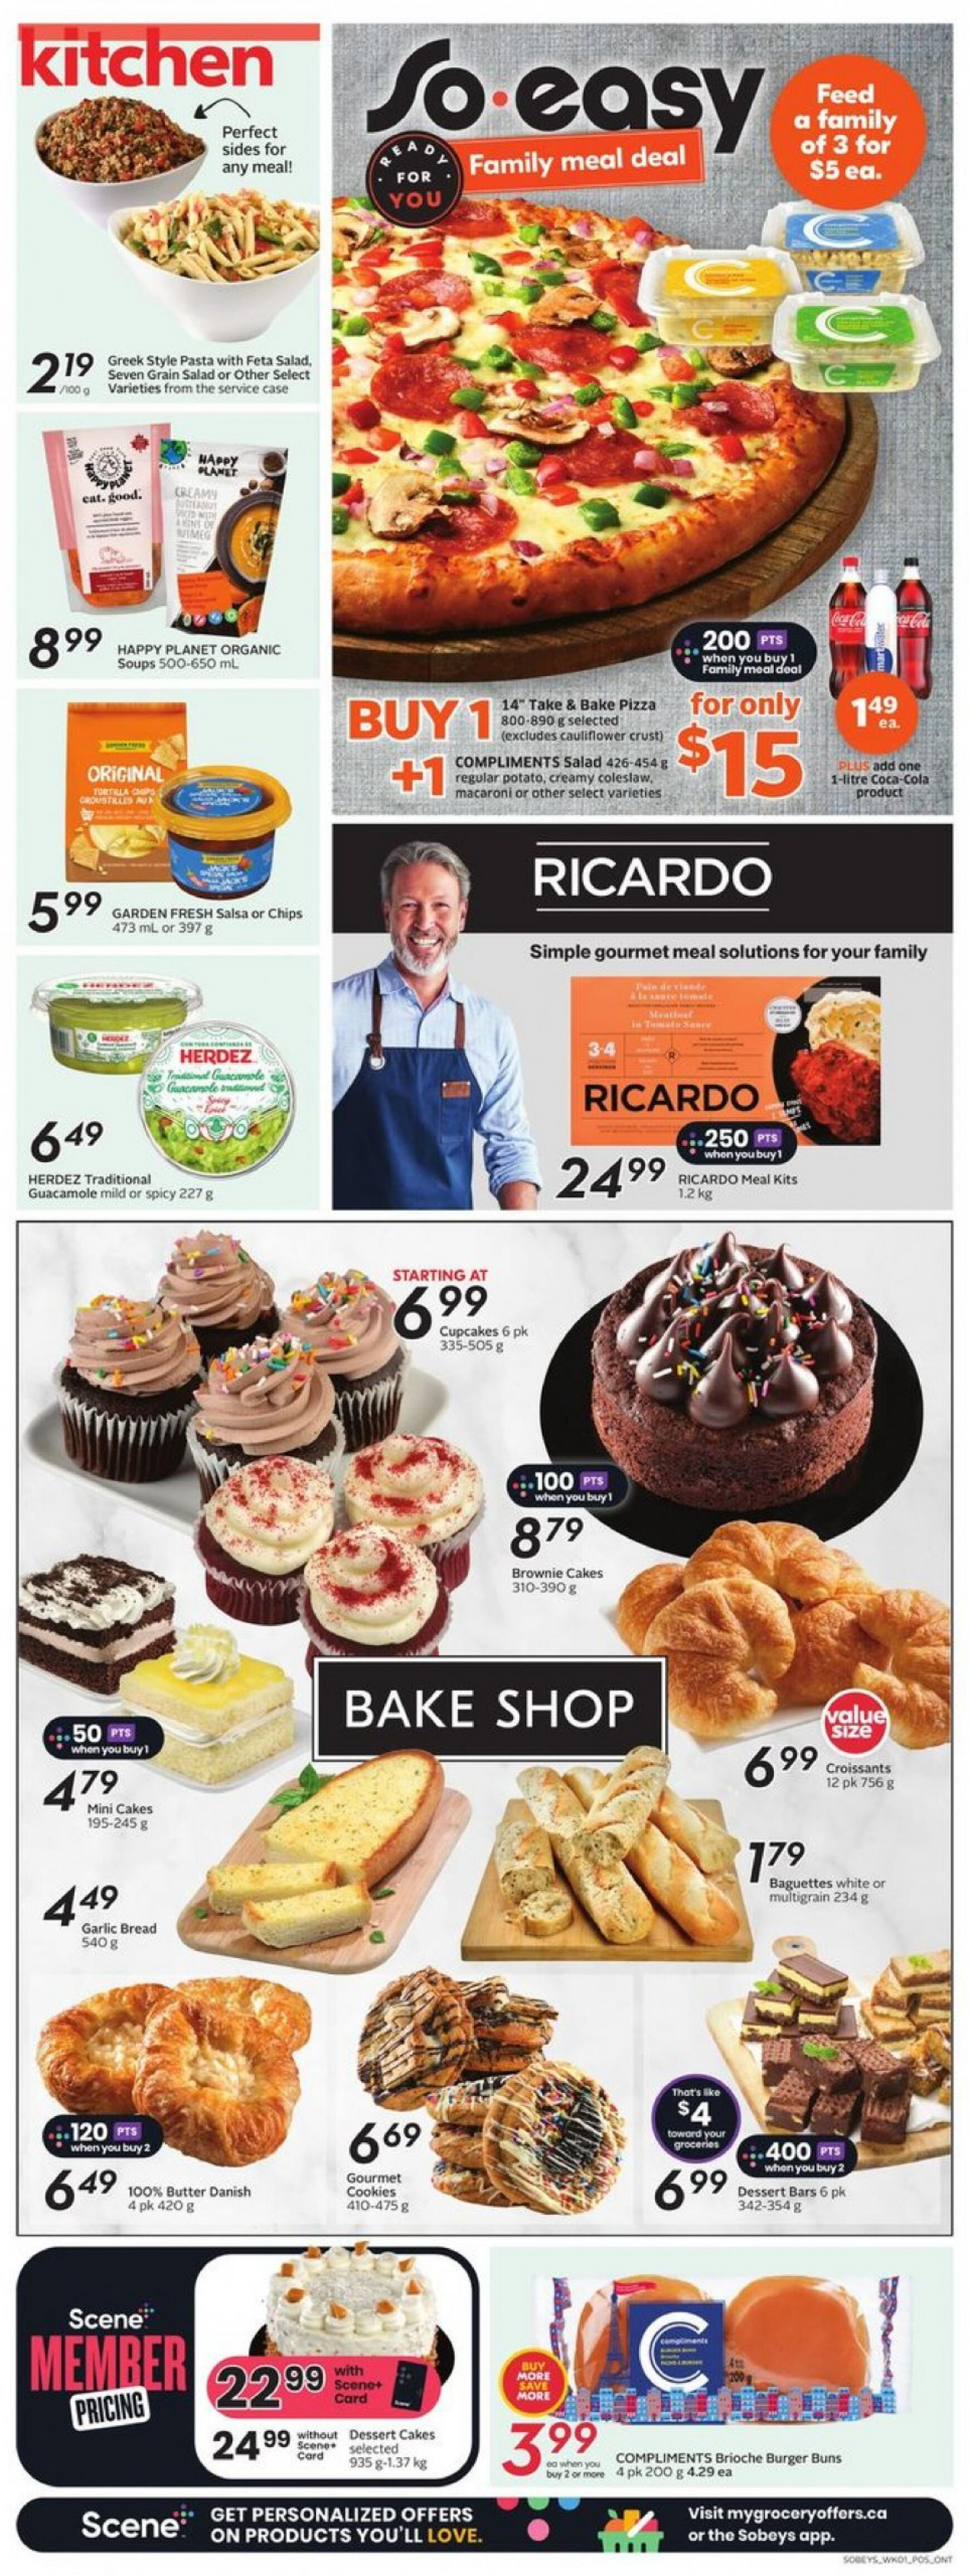 sobeys - Sobeys - Weekly Flyer - Ontario flyer current 02.05. - 08.05. - page: 9